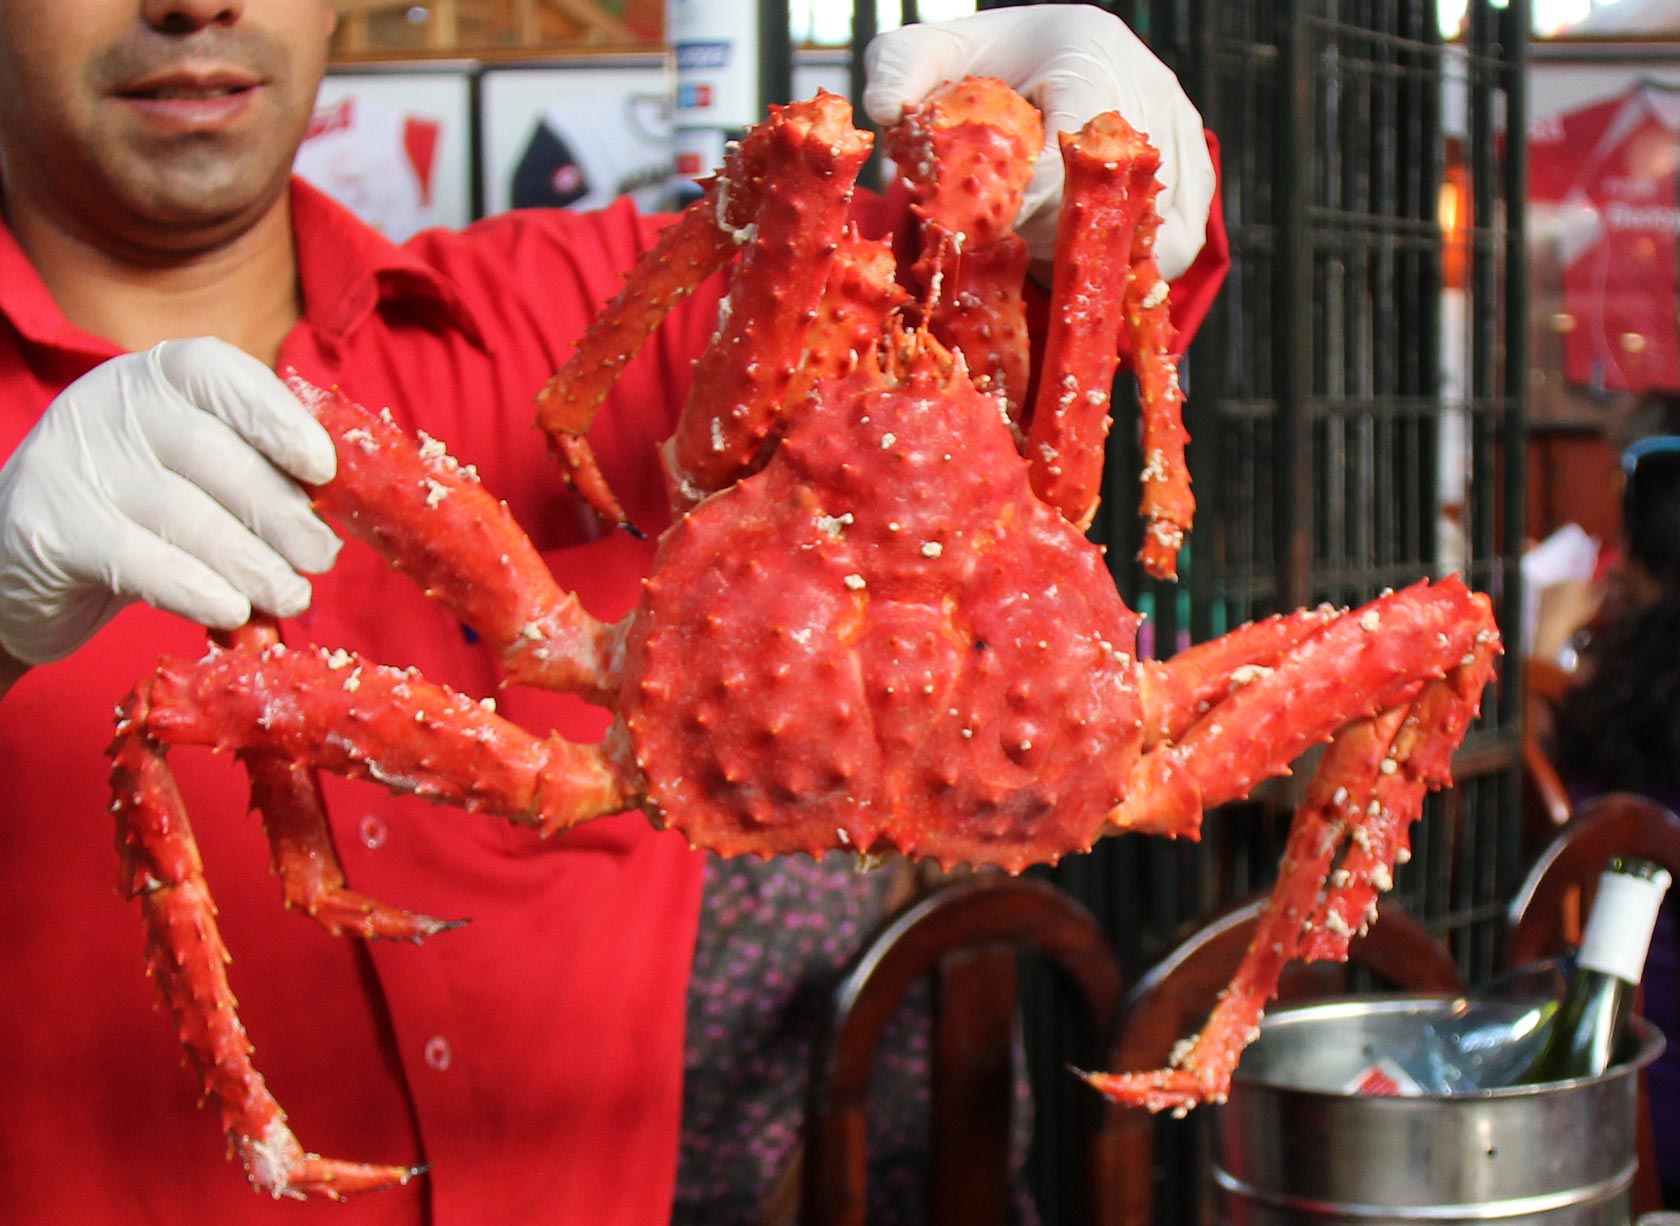 Caught off the coast of Chile, the Chilean King Crab, which is a cousin to the Alaskan King Crab, is an expensive and tasty dish in Chile's restaurants.